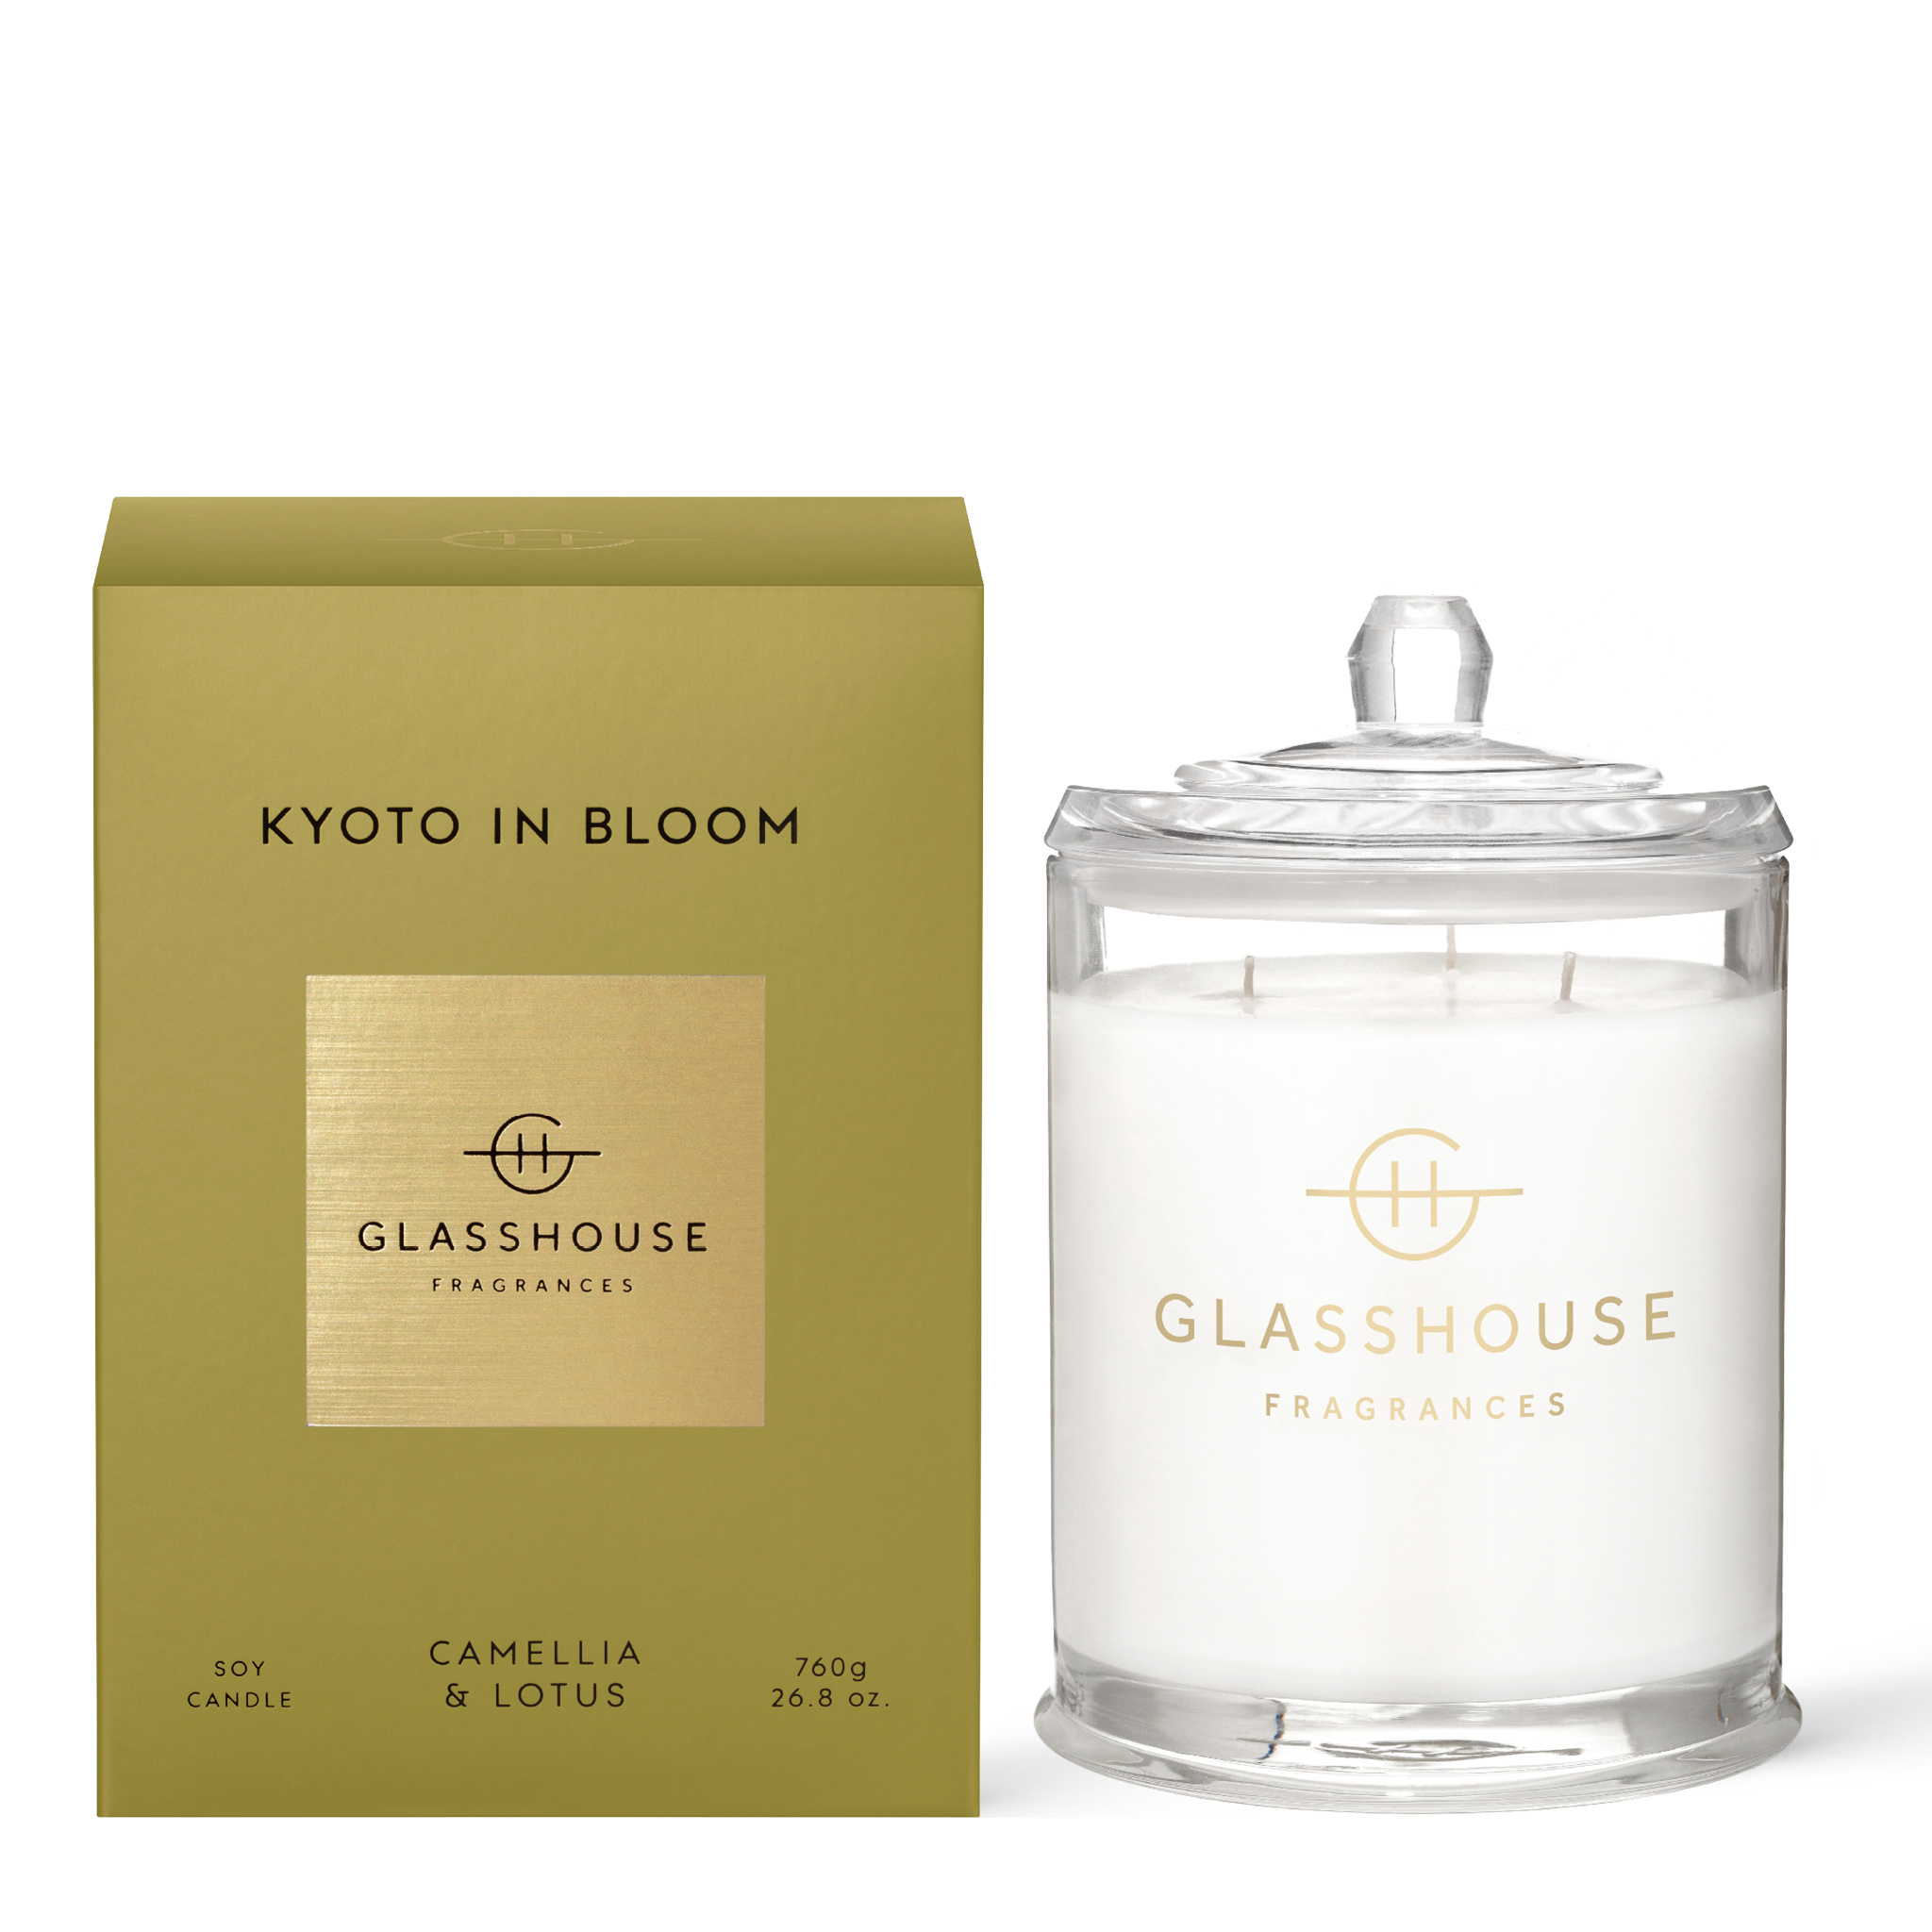 Glasshouse Fragrances Kyoto in Bloom Camellia and Lotus 760g Soy Candle with box